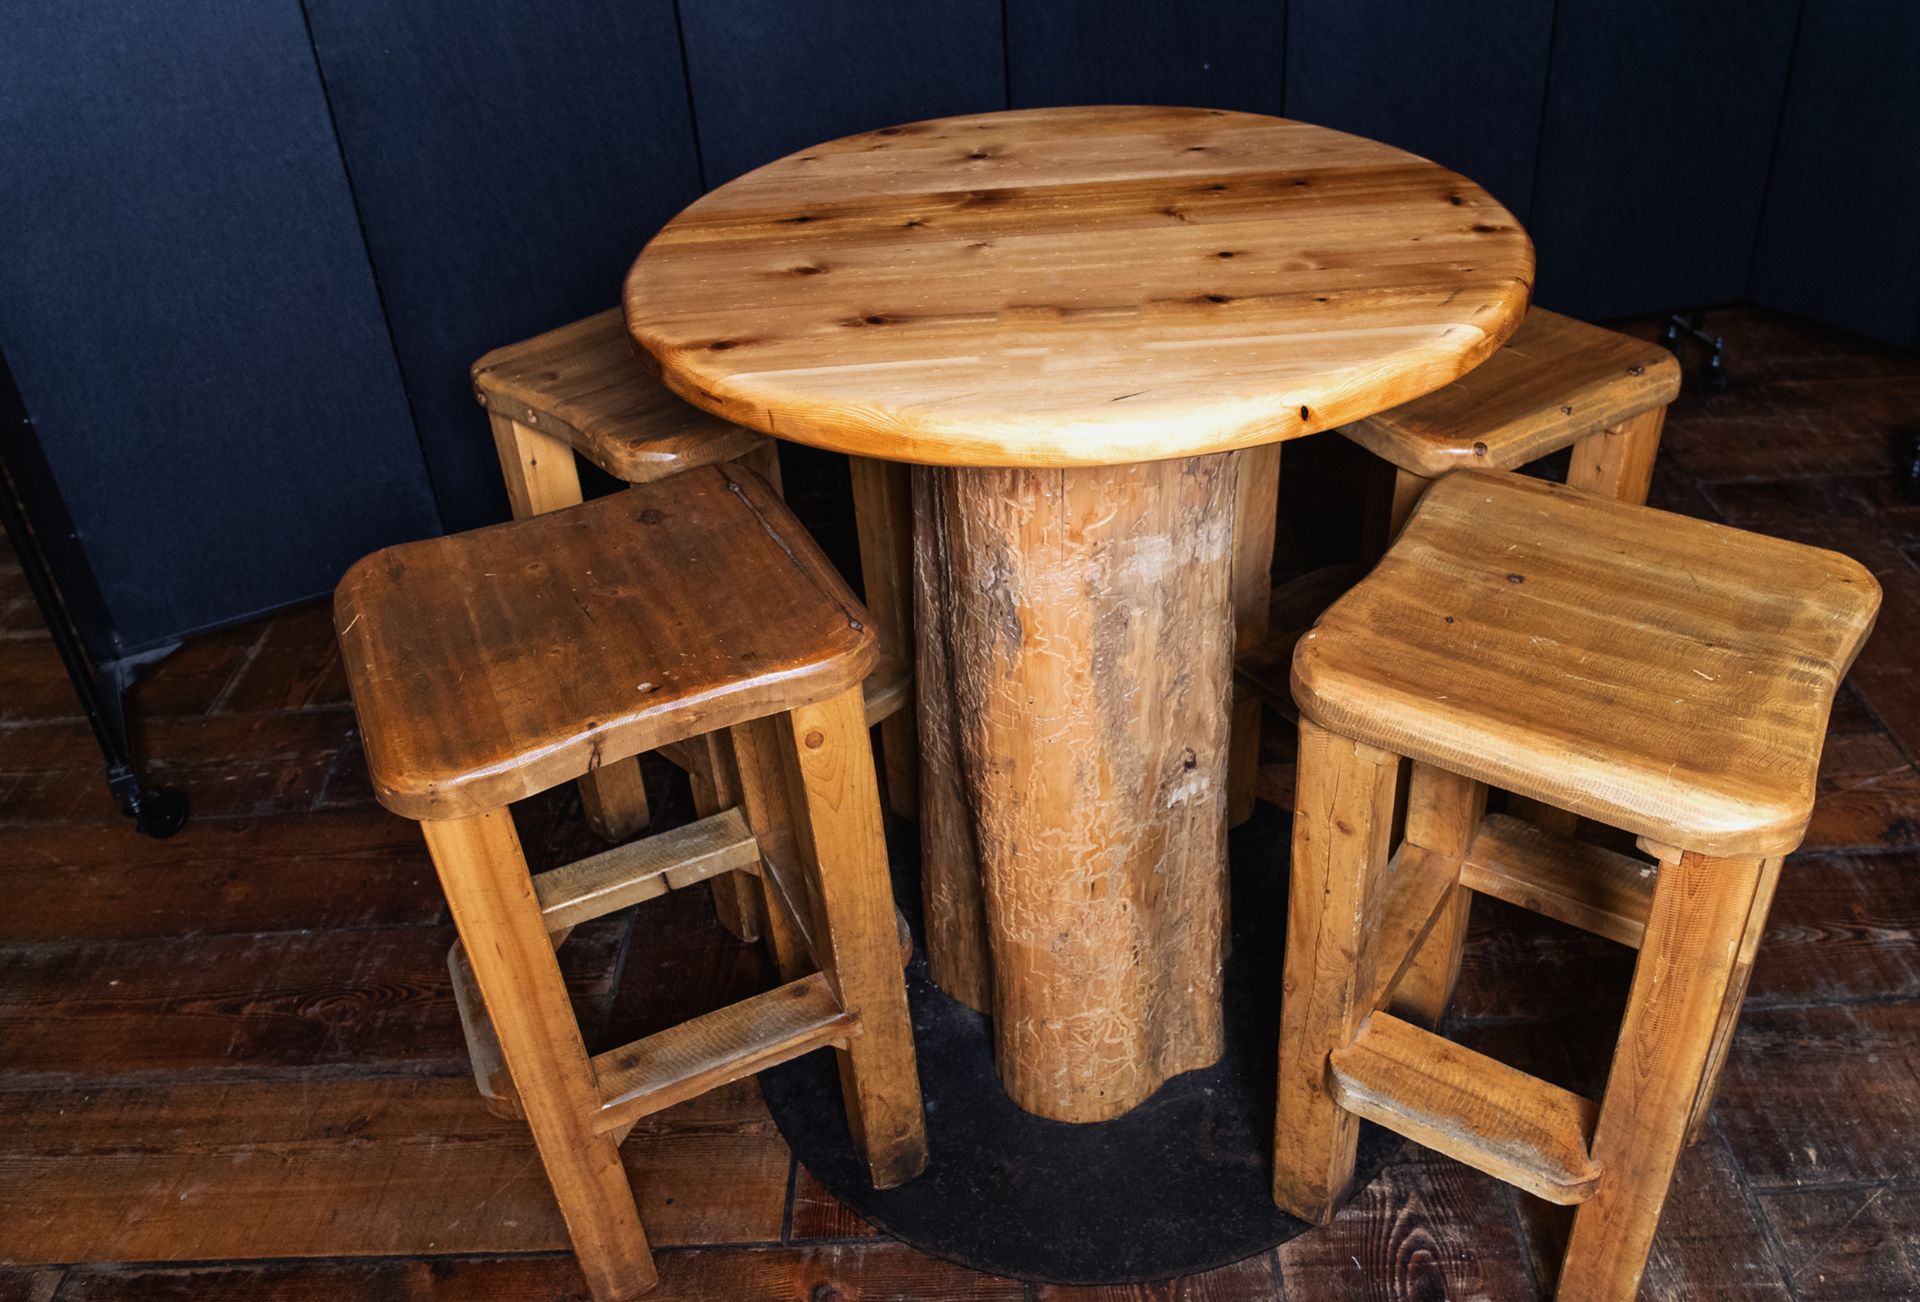 ROUND PUB TABLE WITH 4 STOOLS - H-42" D-34"